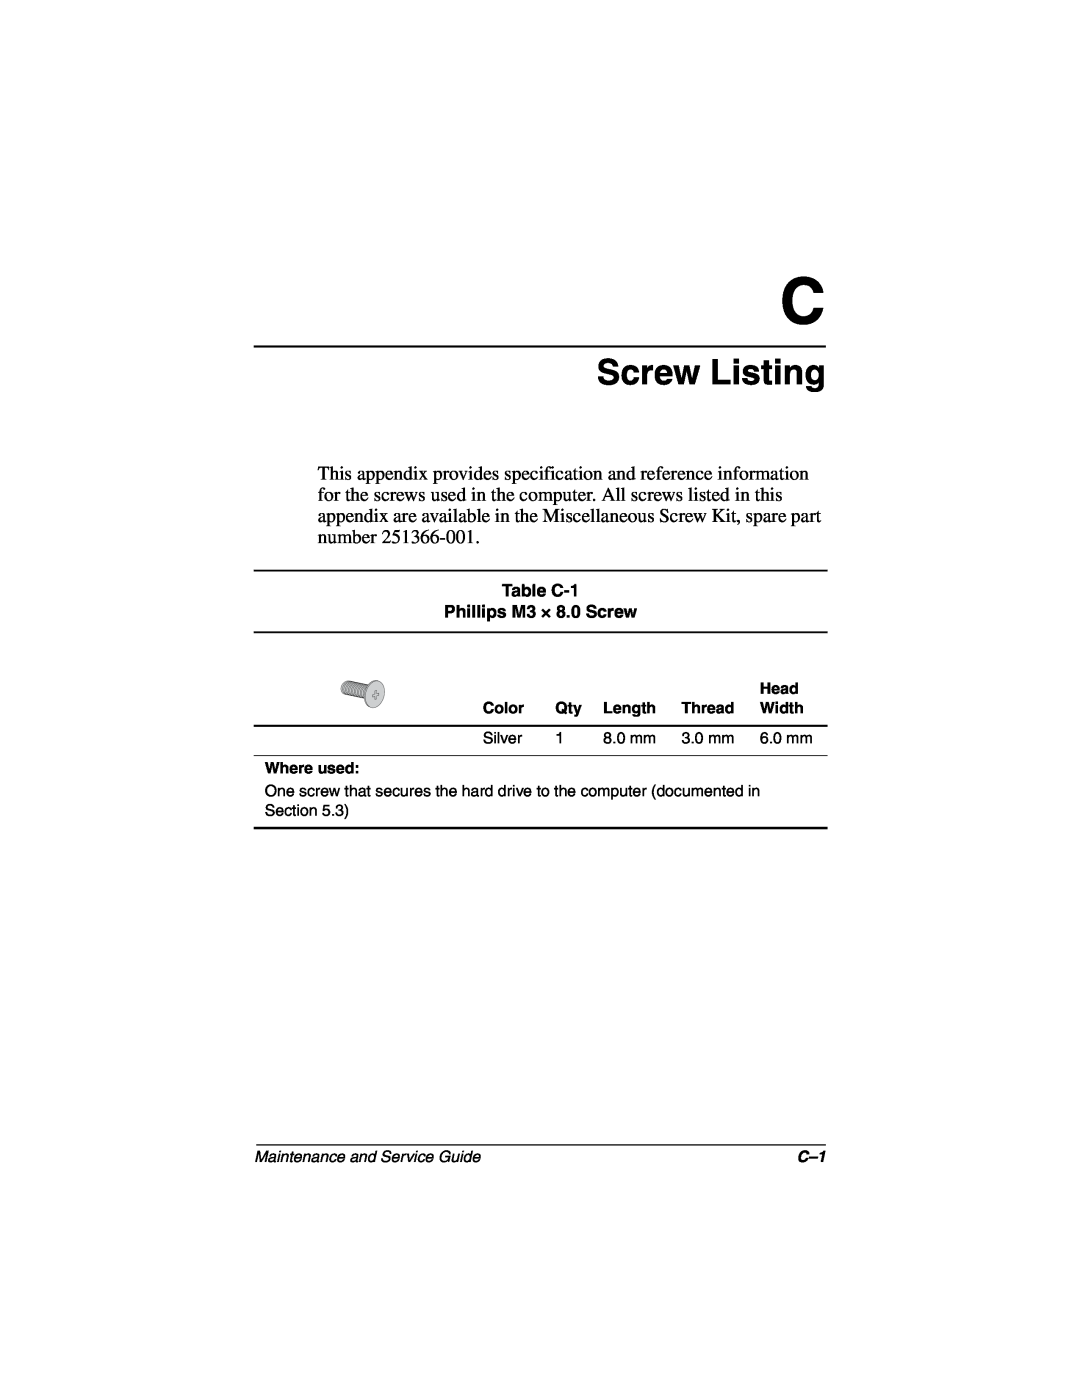 Compaq N160 manual Screw Listing, Table C-1 Phillips M3 × 8.0 Screw, Maintenance and Service Guide 